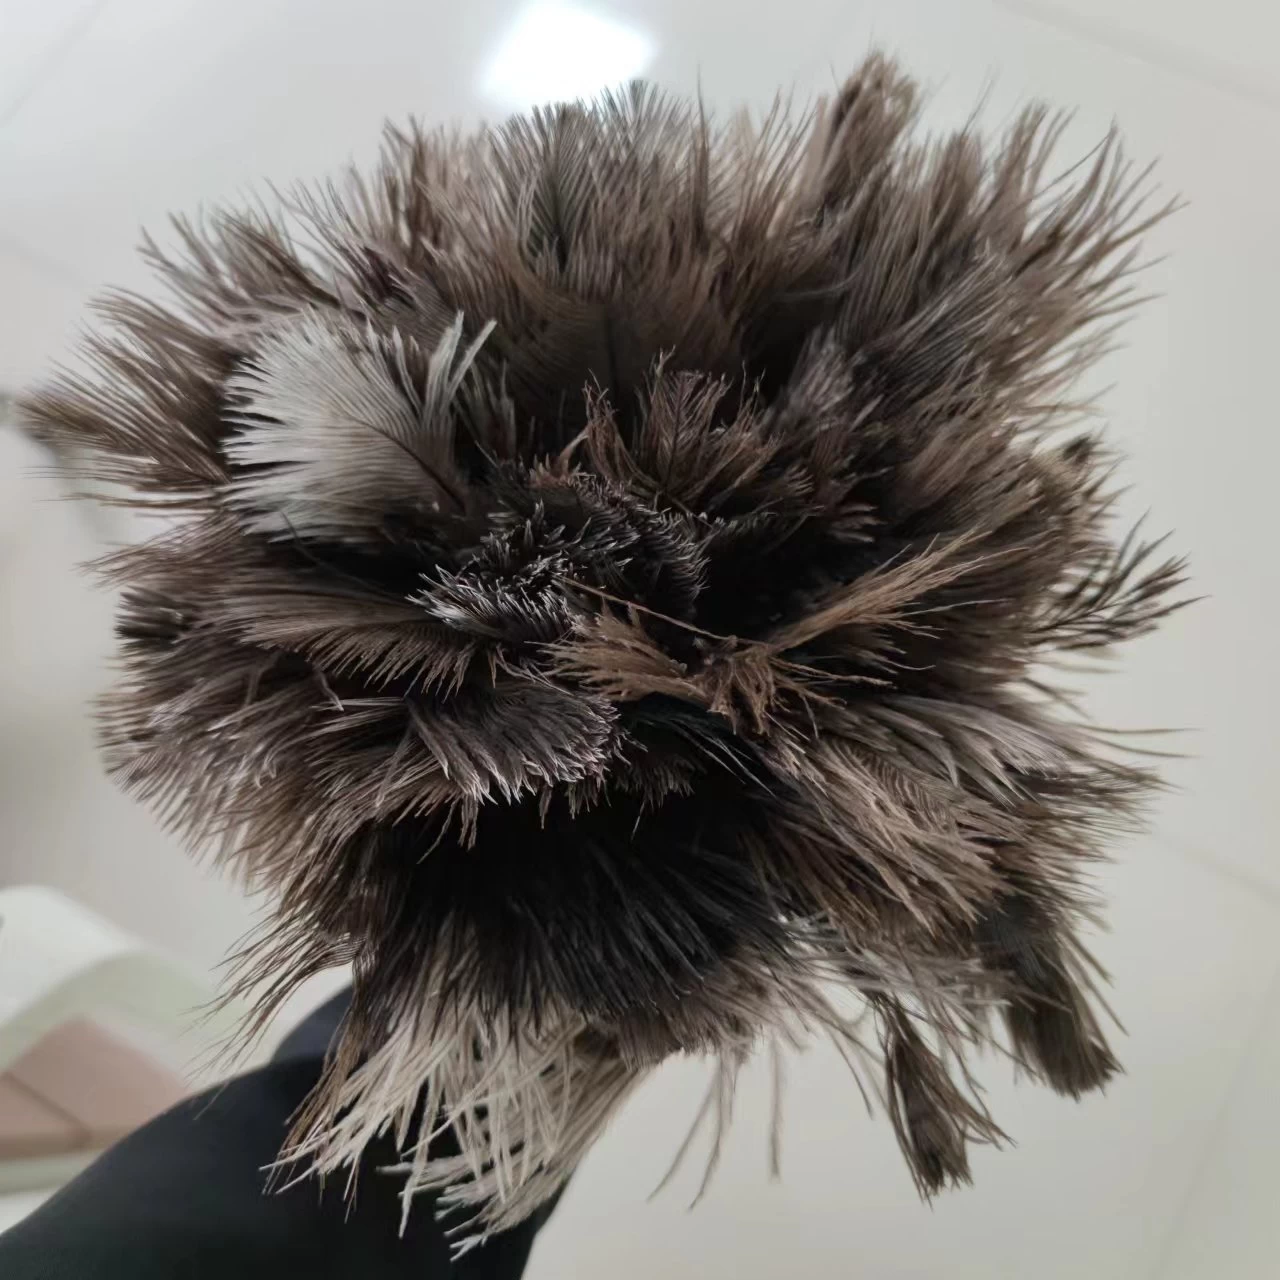 2022 new product ostrich feather duster,China ostrich feather duster supplier, China ostrich feather duster manufacturer,ostrich feather duster clean the plantation shutter